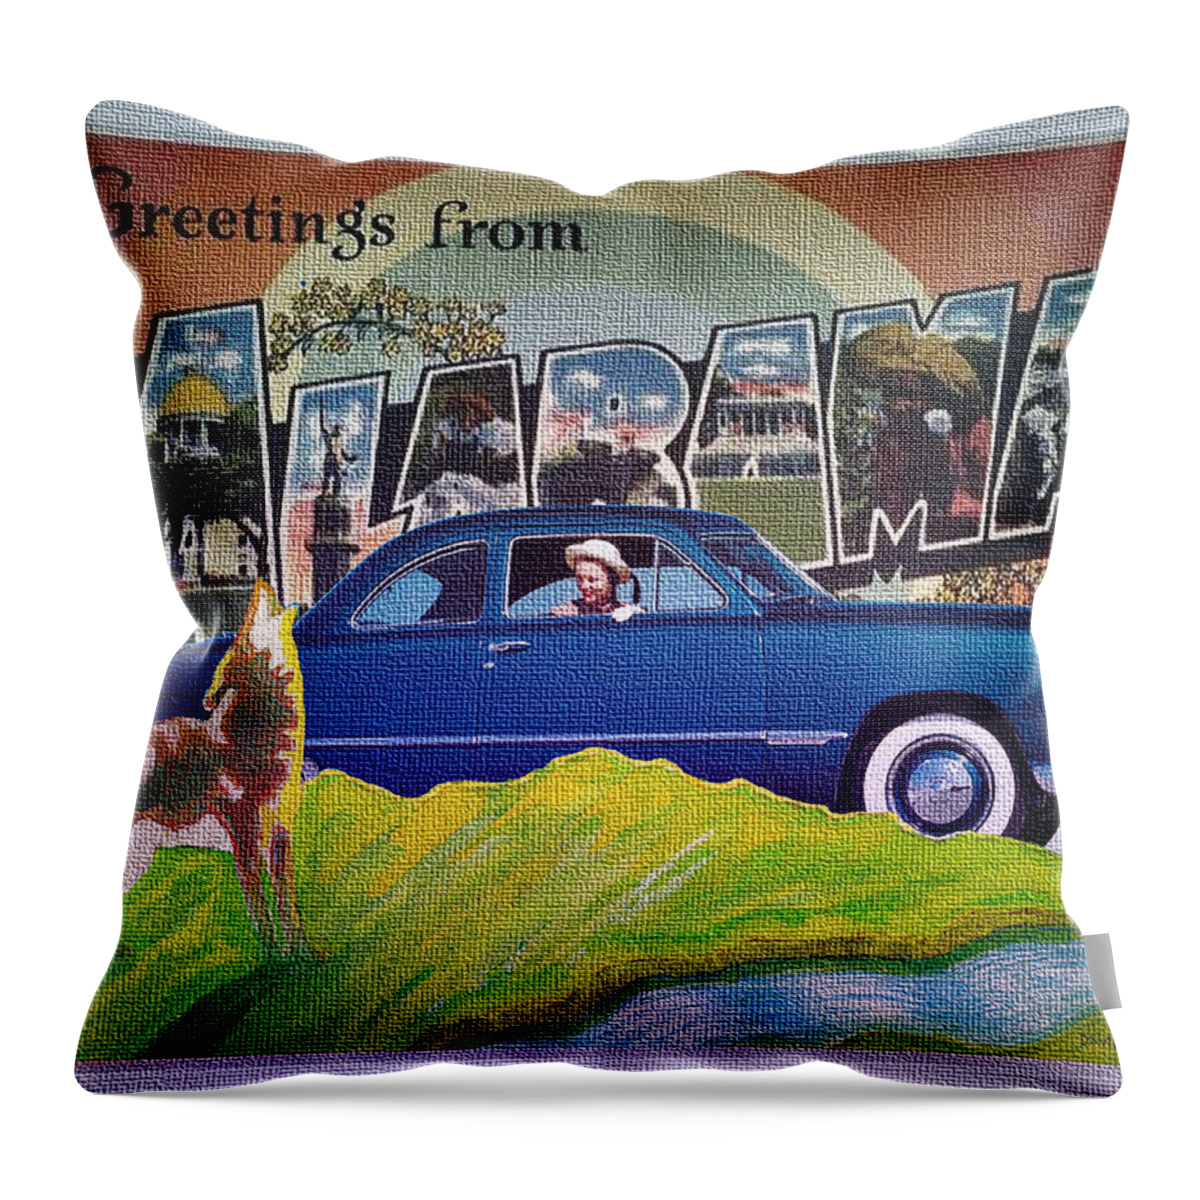 Dixie Road Trips Throw Pillow featuring the digital art Dixie Road Trips / Alabama by David Squibb